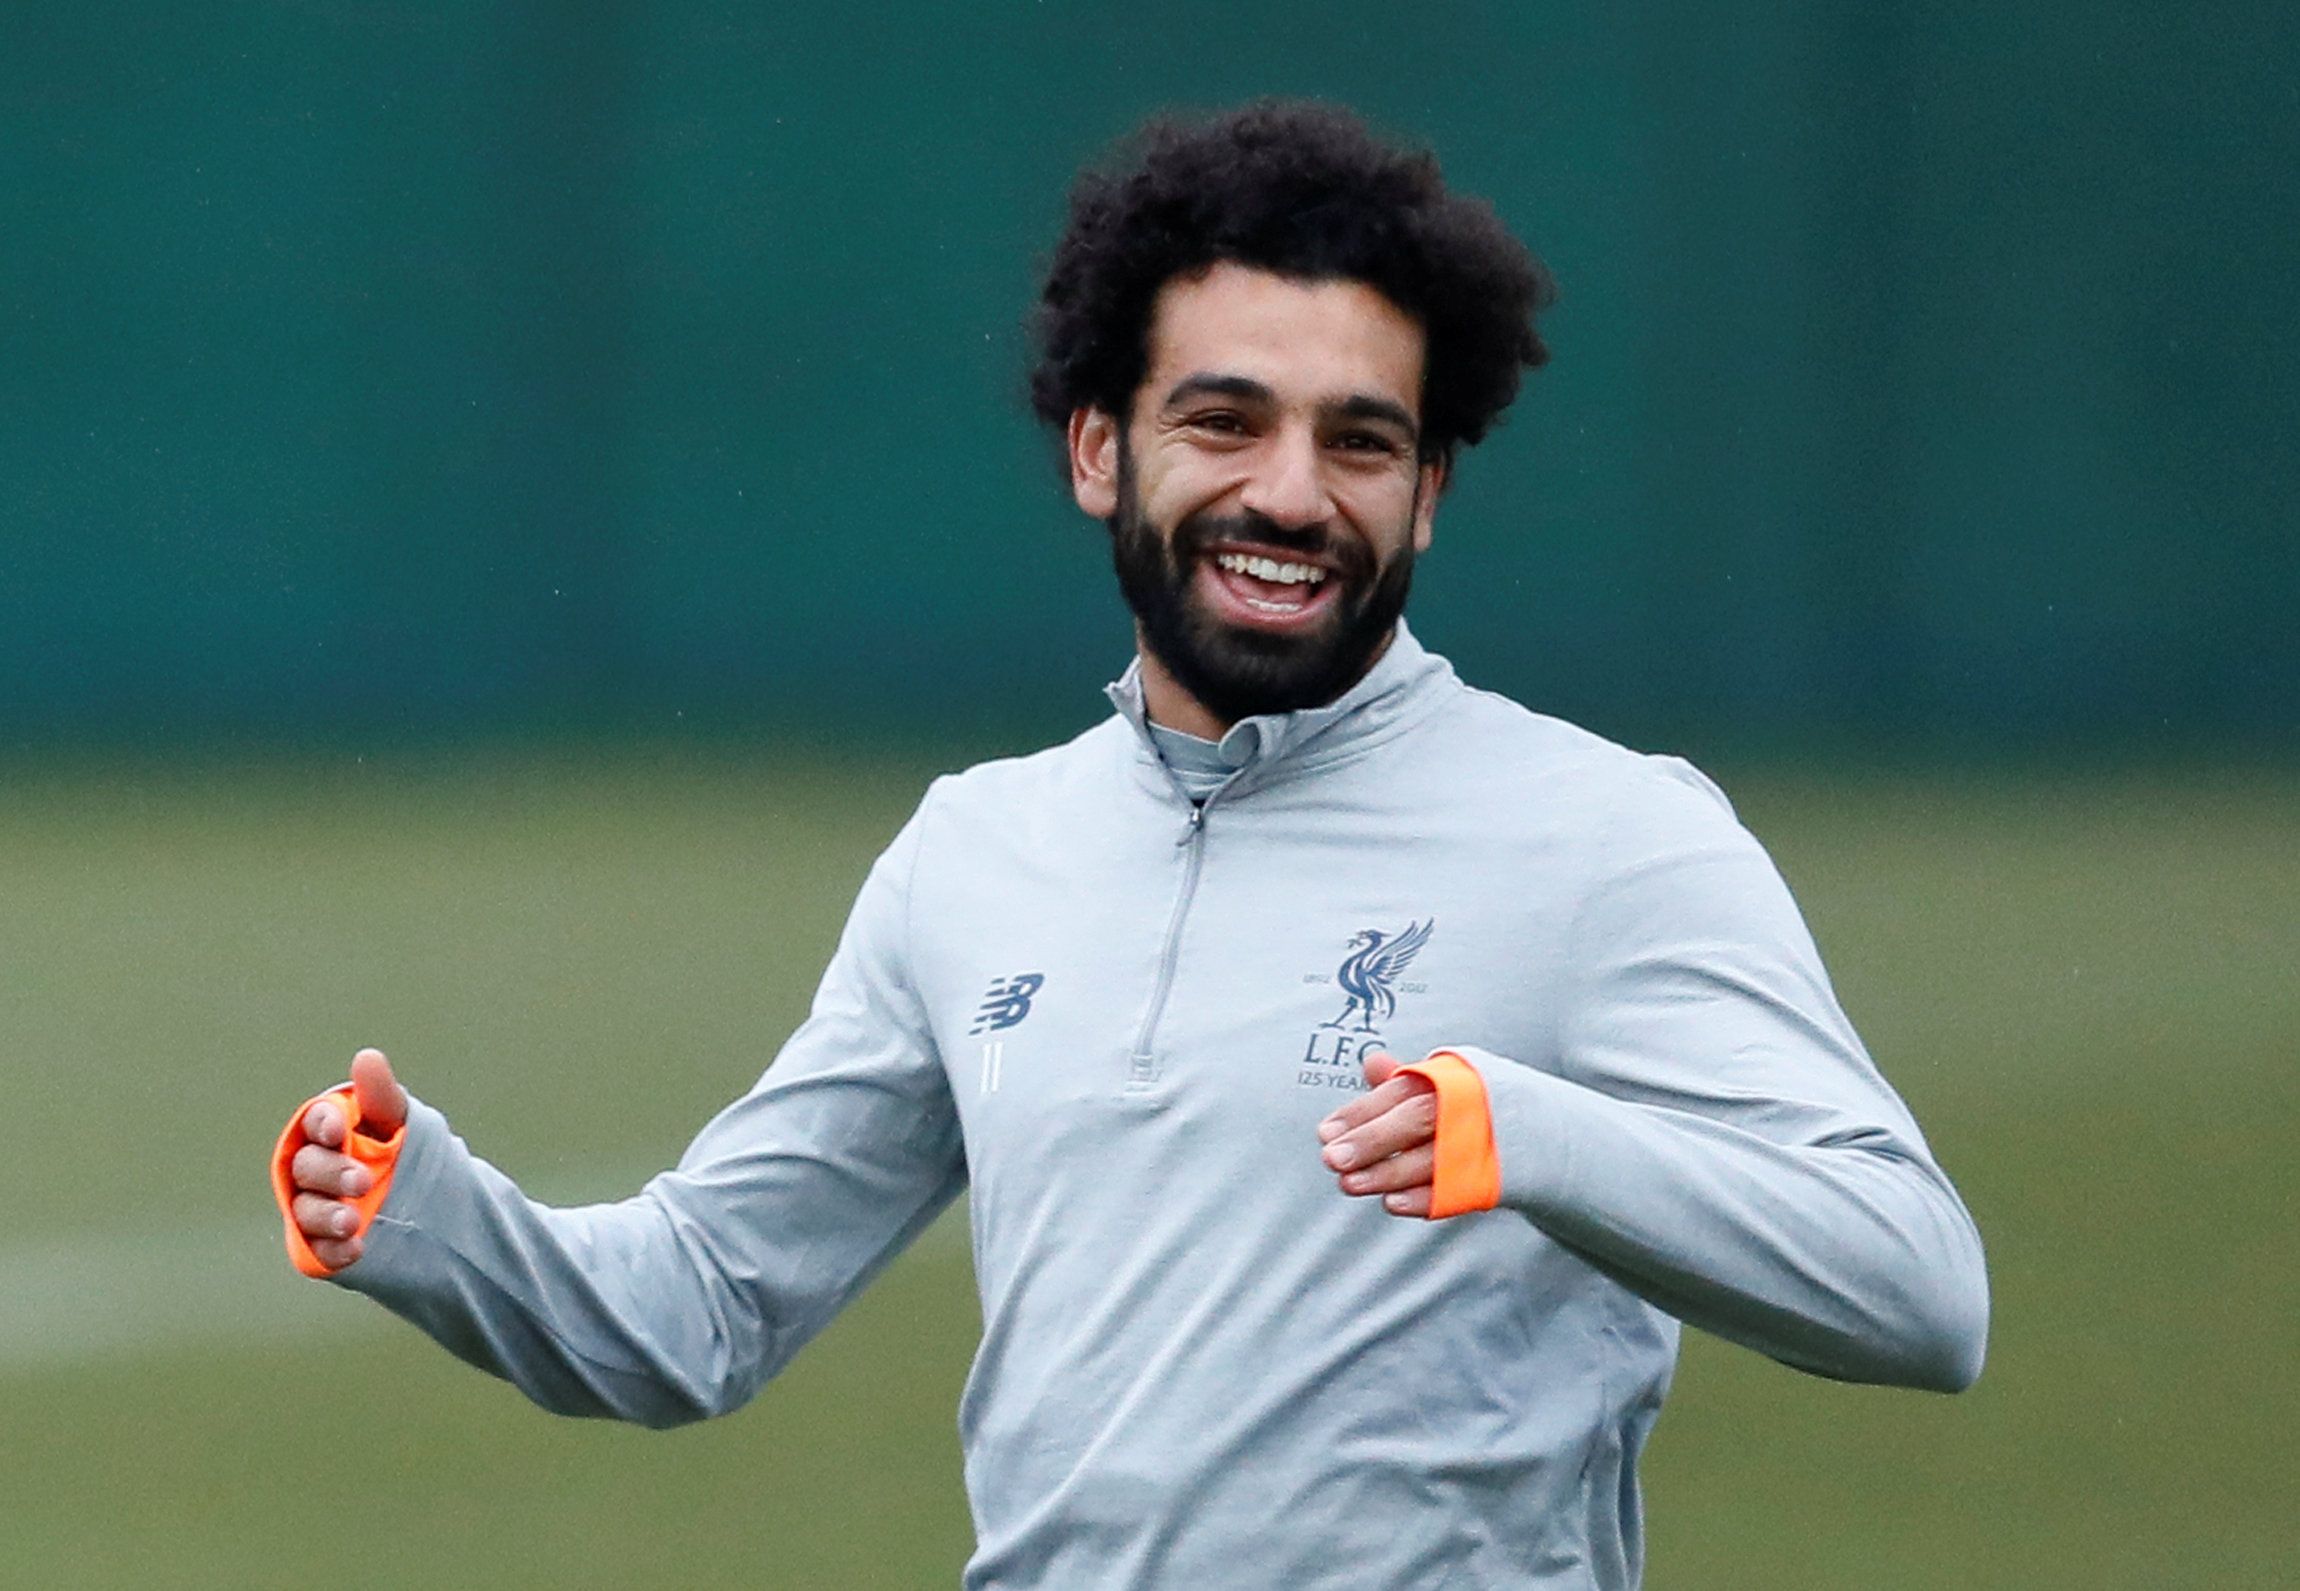 Soccer Football - Champions League - Liverpool Training - Melwood Training Ground, Liverpool, Britain - March 5, 2018   Liverpool's Mohamed Salah during training   Action Images via Reuters/Jason Cairnduff